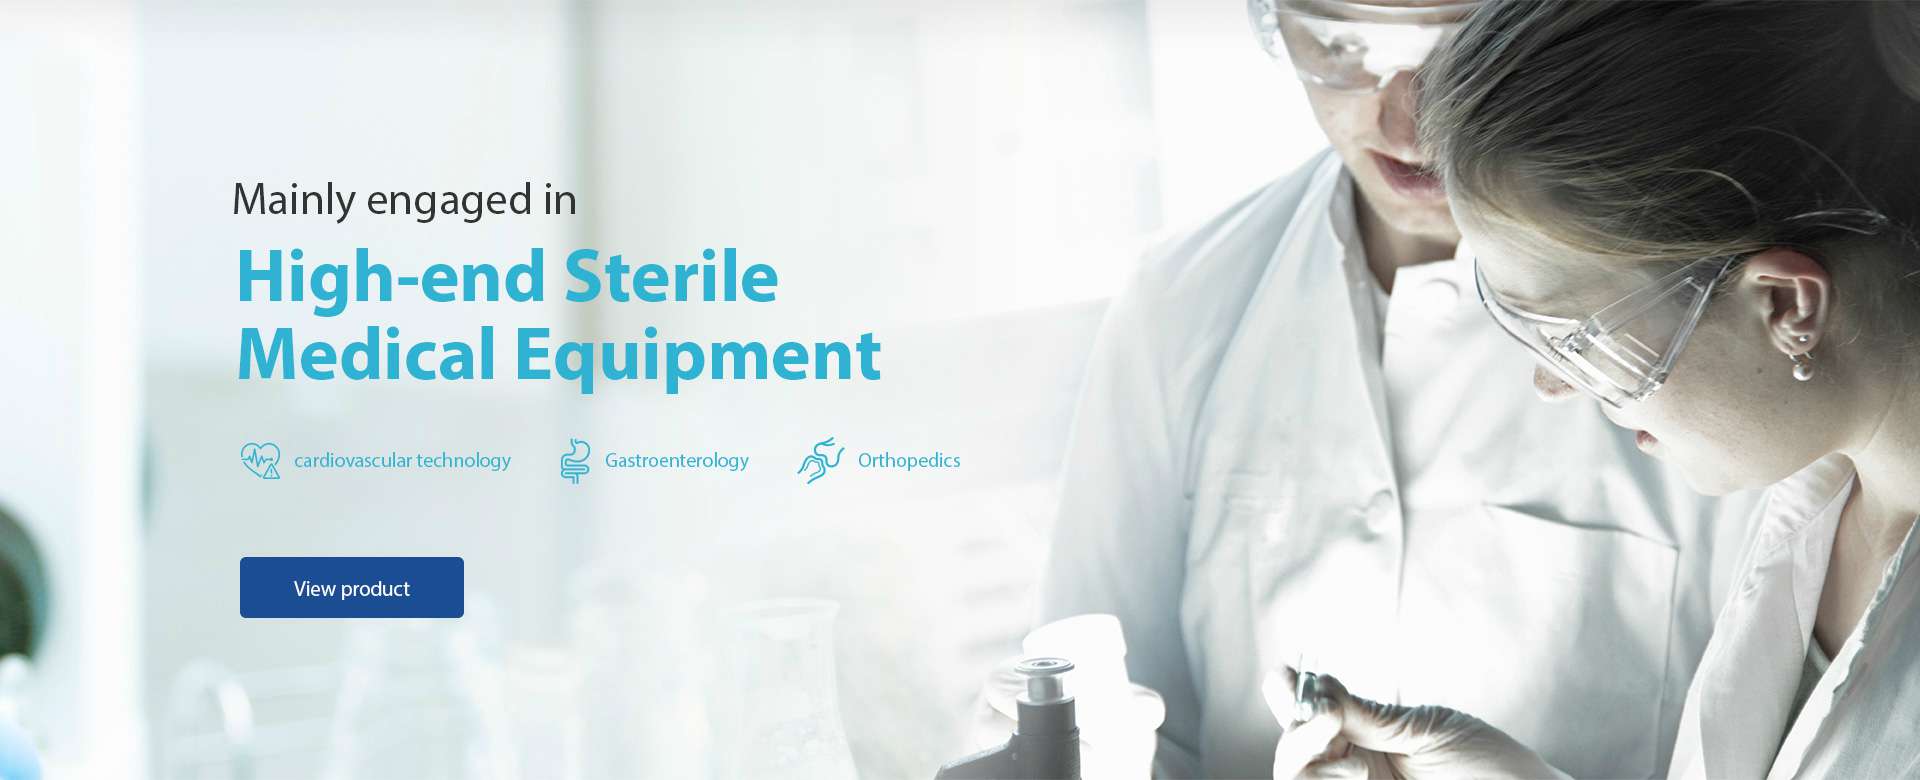 Mainly engaged in High-end Sterile Medical Equipment